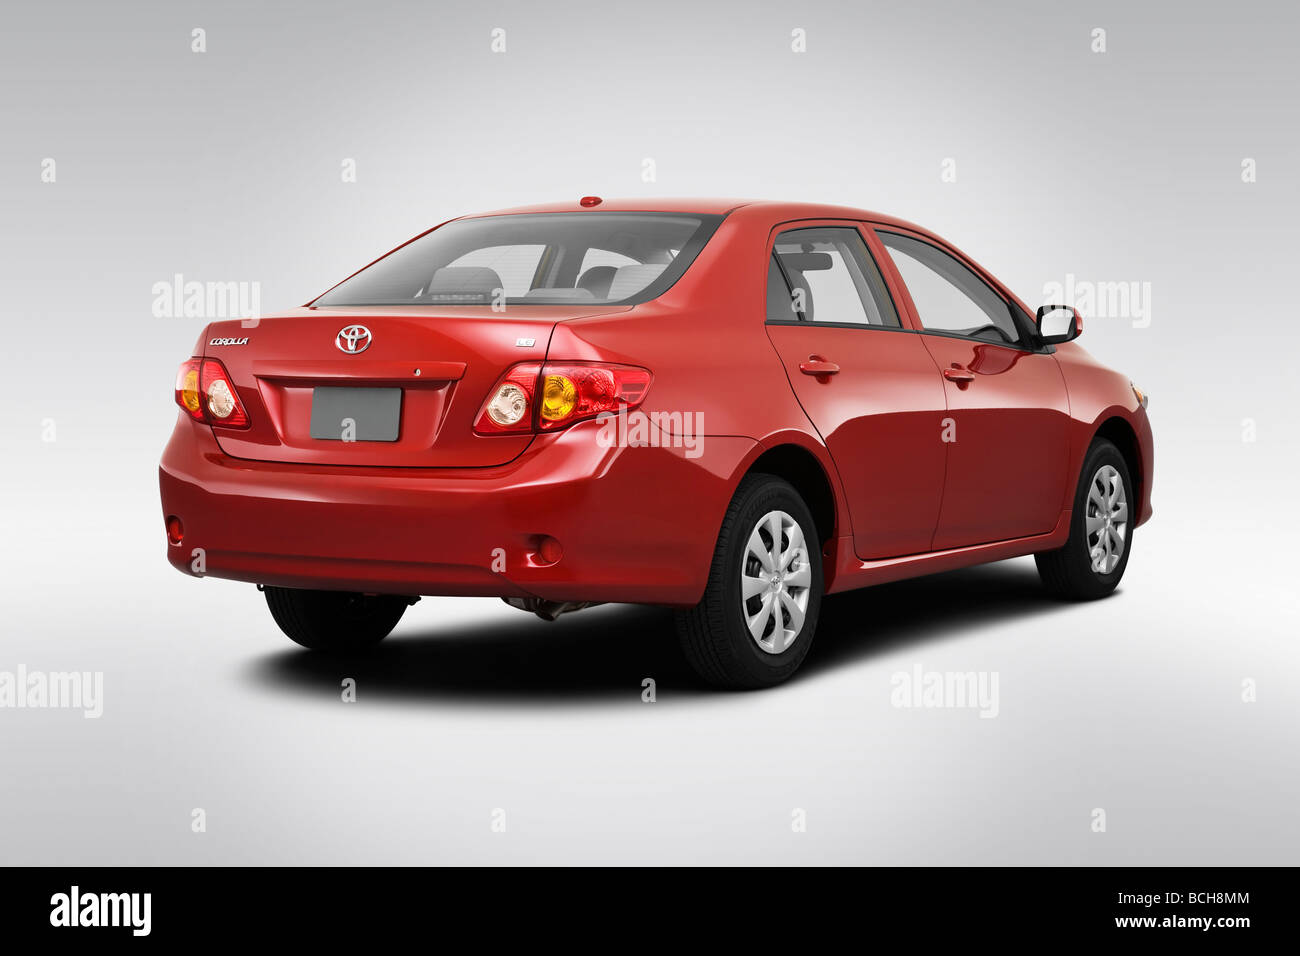 2010 Toyota Corolla Le In Red Rear Angle View Stock Photo